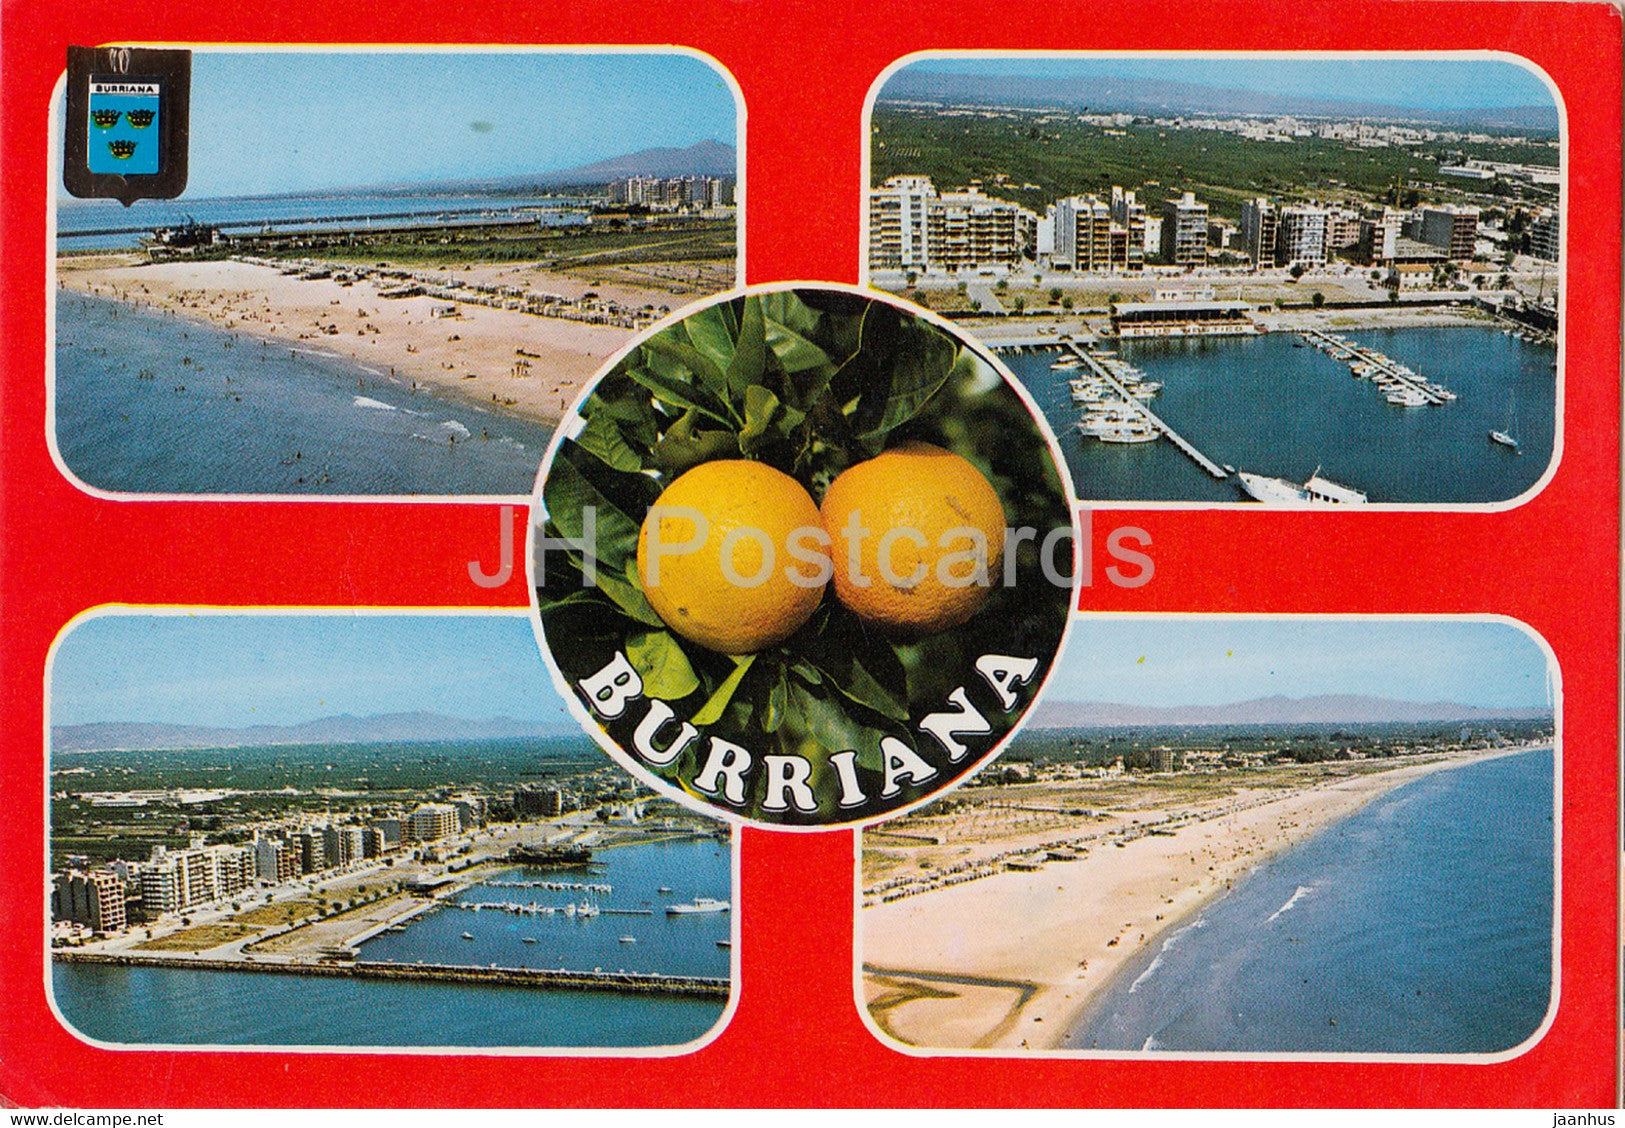 Burriana - Diversos aspectos - Different aspects - beach - hotels - orange - multiview - 36 - Spain - used - JH Postcards